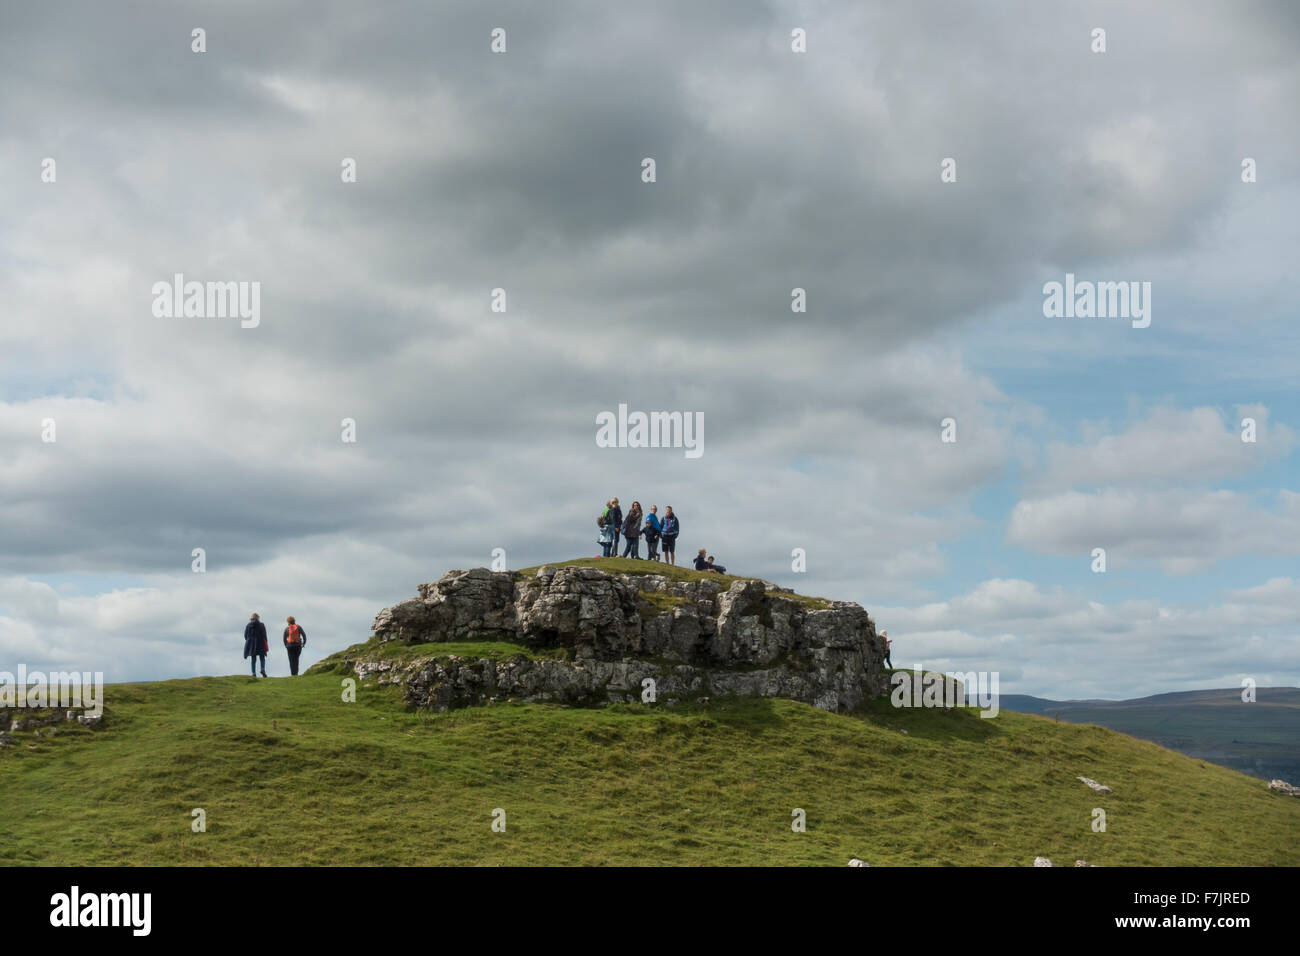 Yorkshire Dales upland, limestone scenery - People stand high, on top of Conistone Pie (rocky outcrop) admiring the rugged landscape. England, GB, UK. Stock Photo